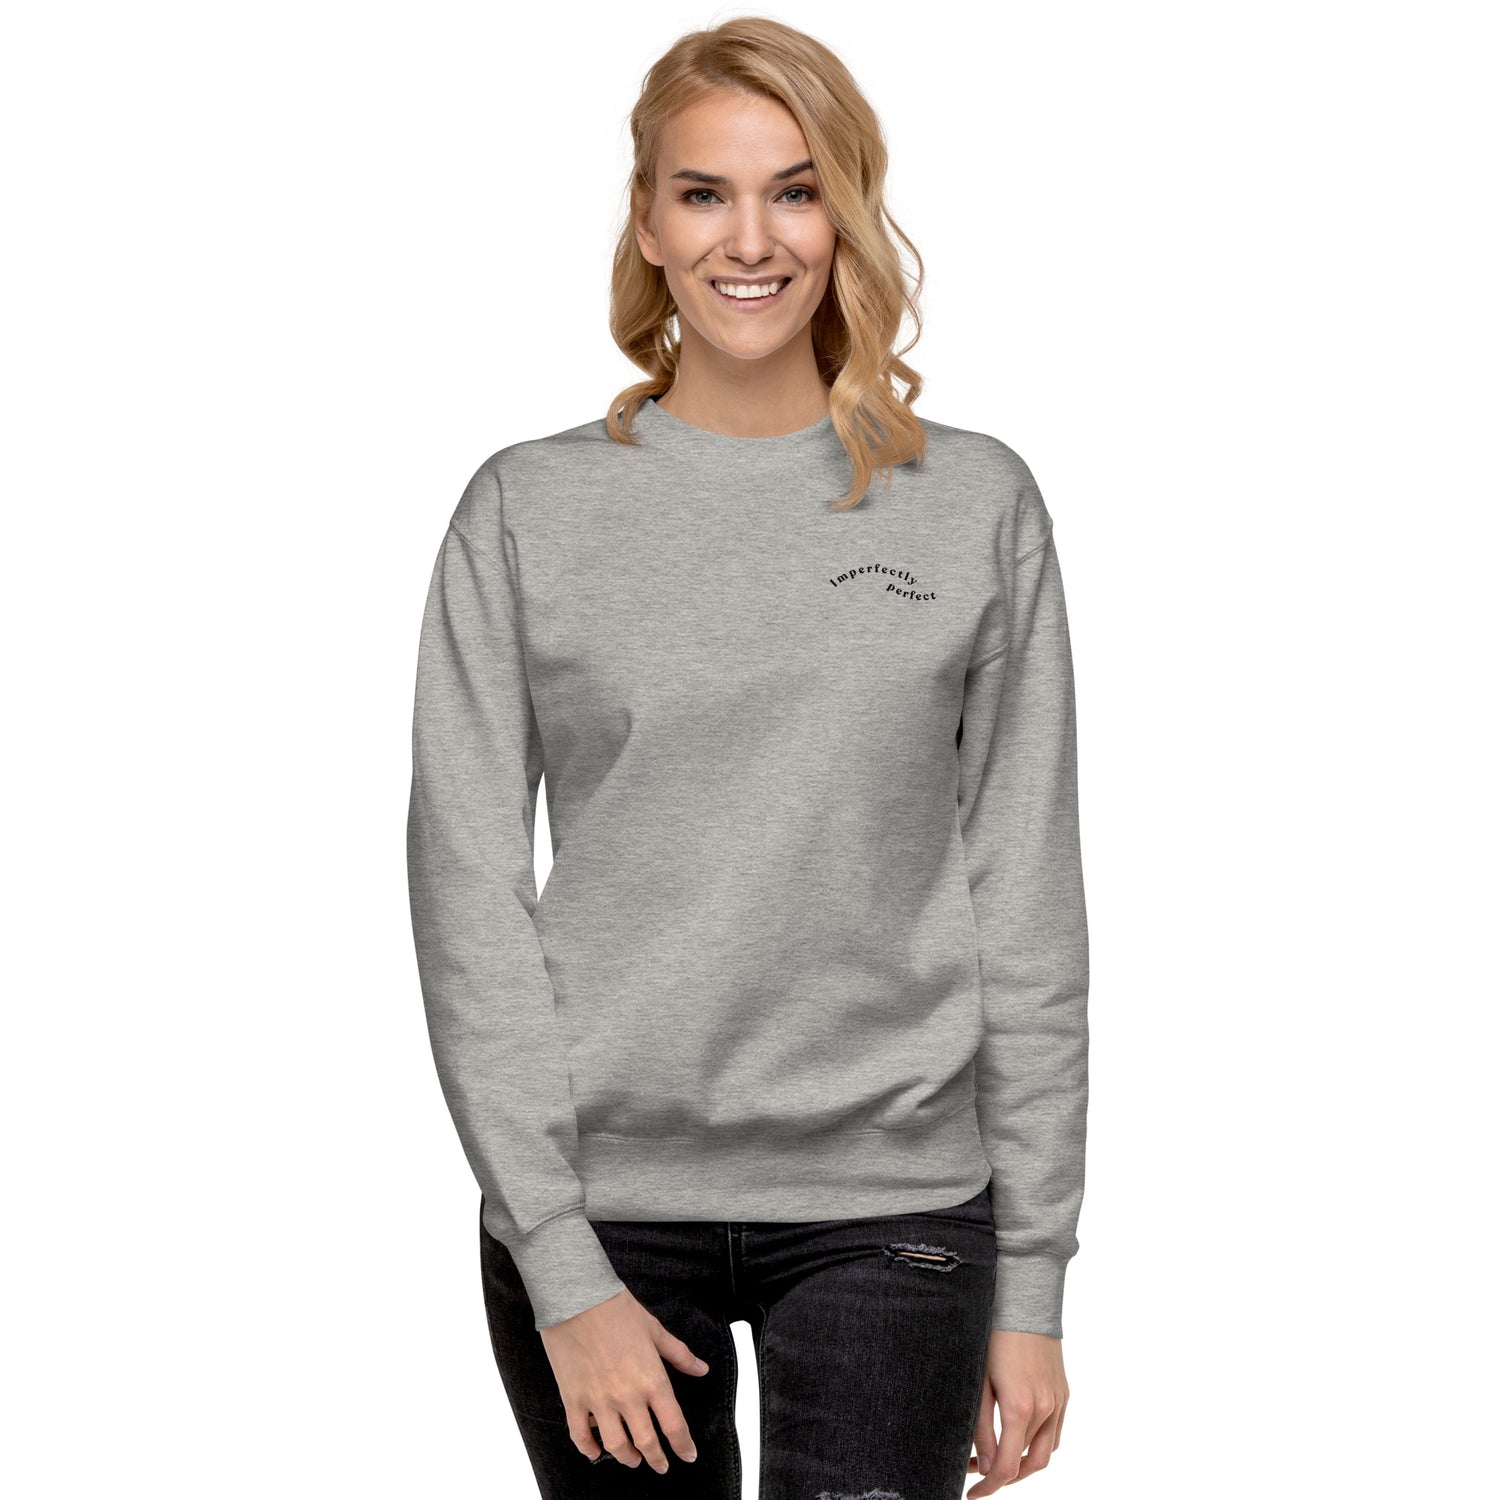 Front- Grey crewneck sweatshirt supporting the "imperfectly perfect" in oneself.